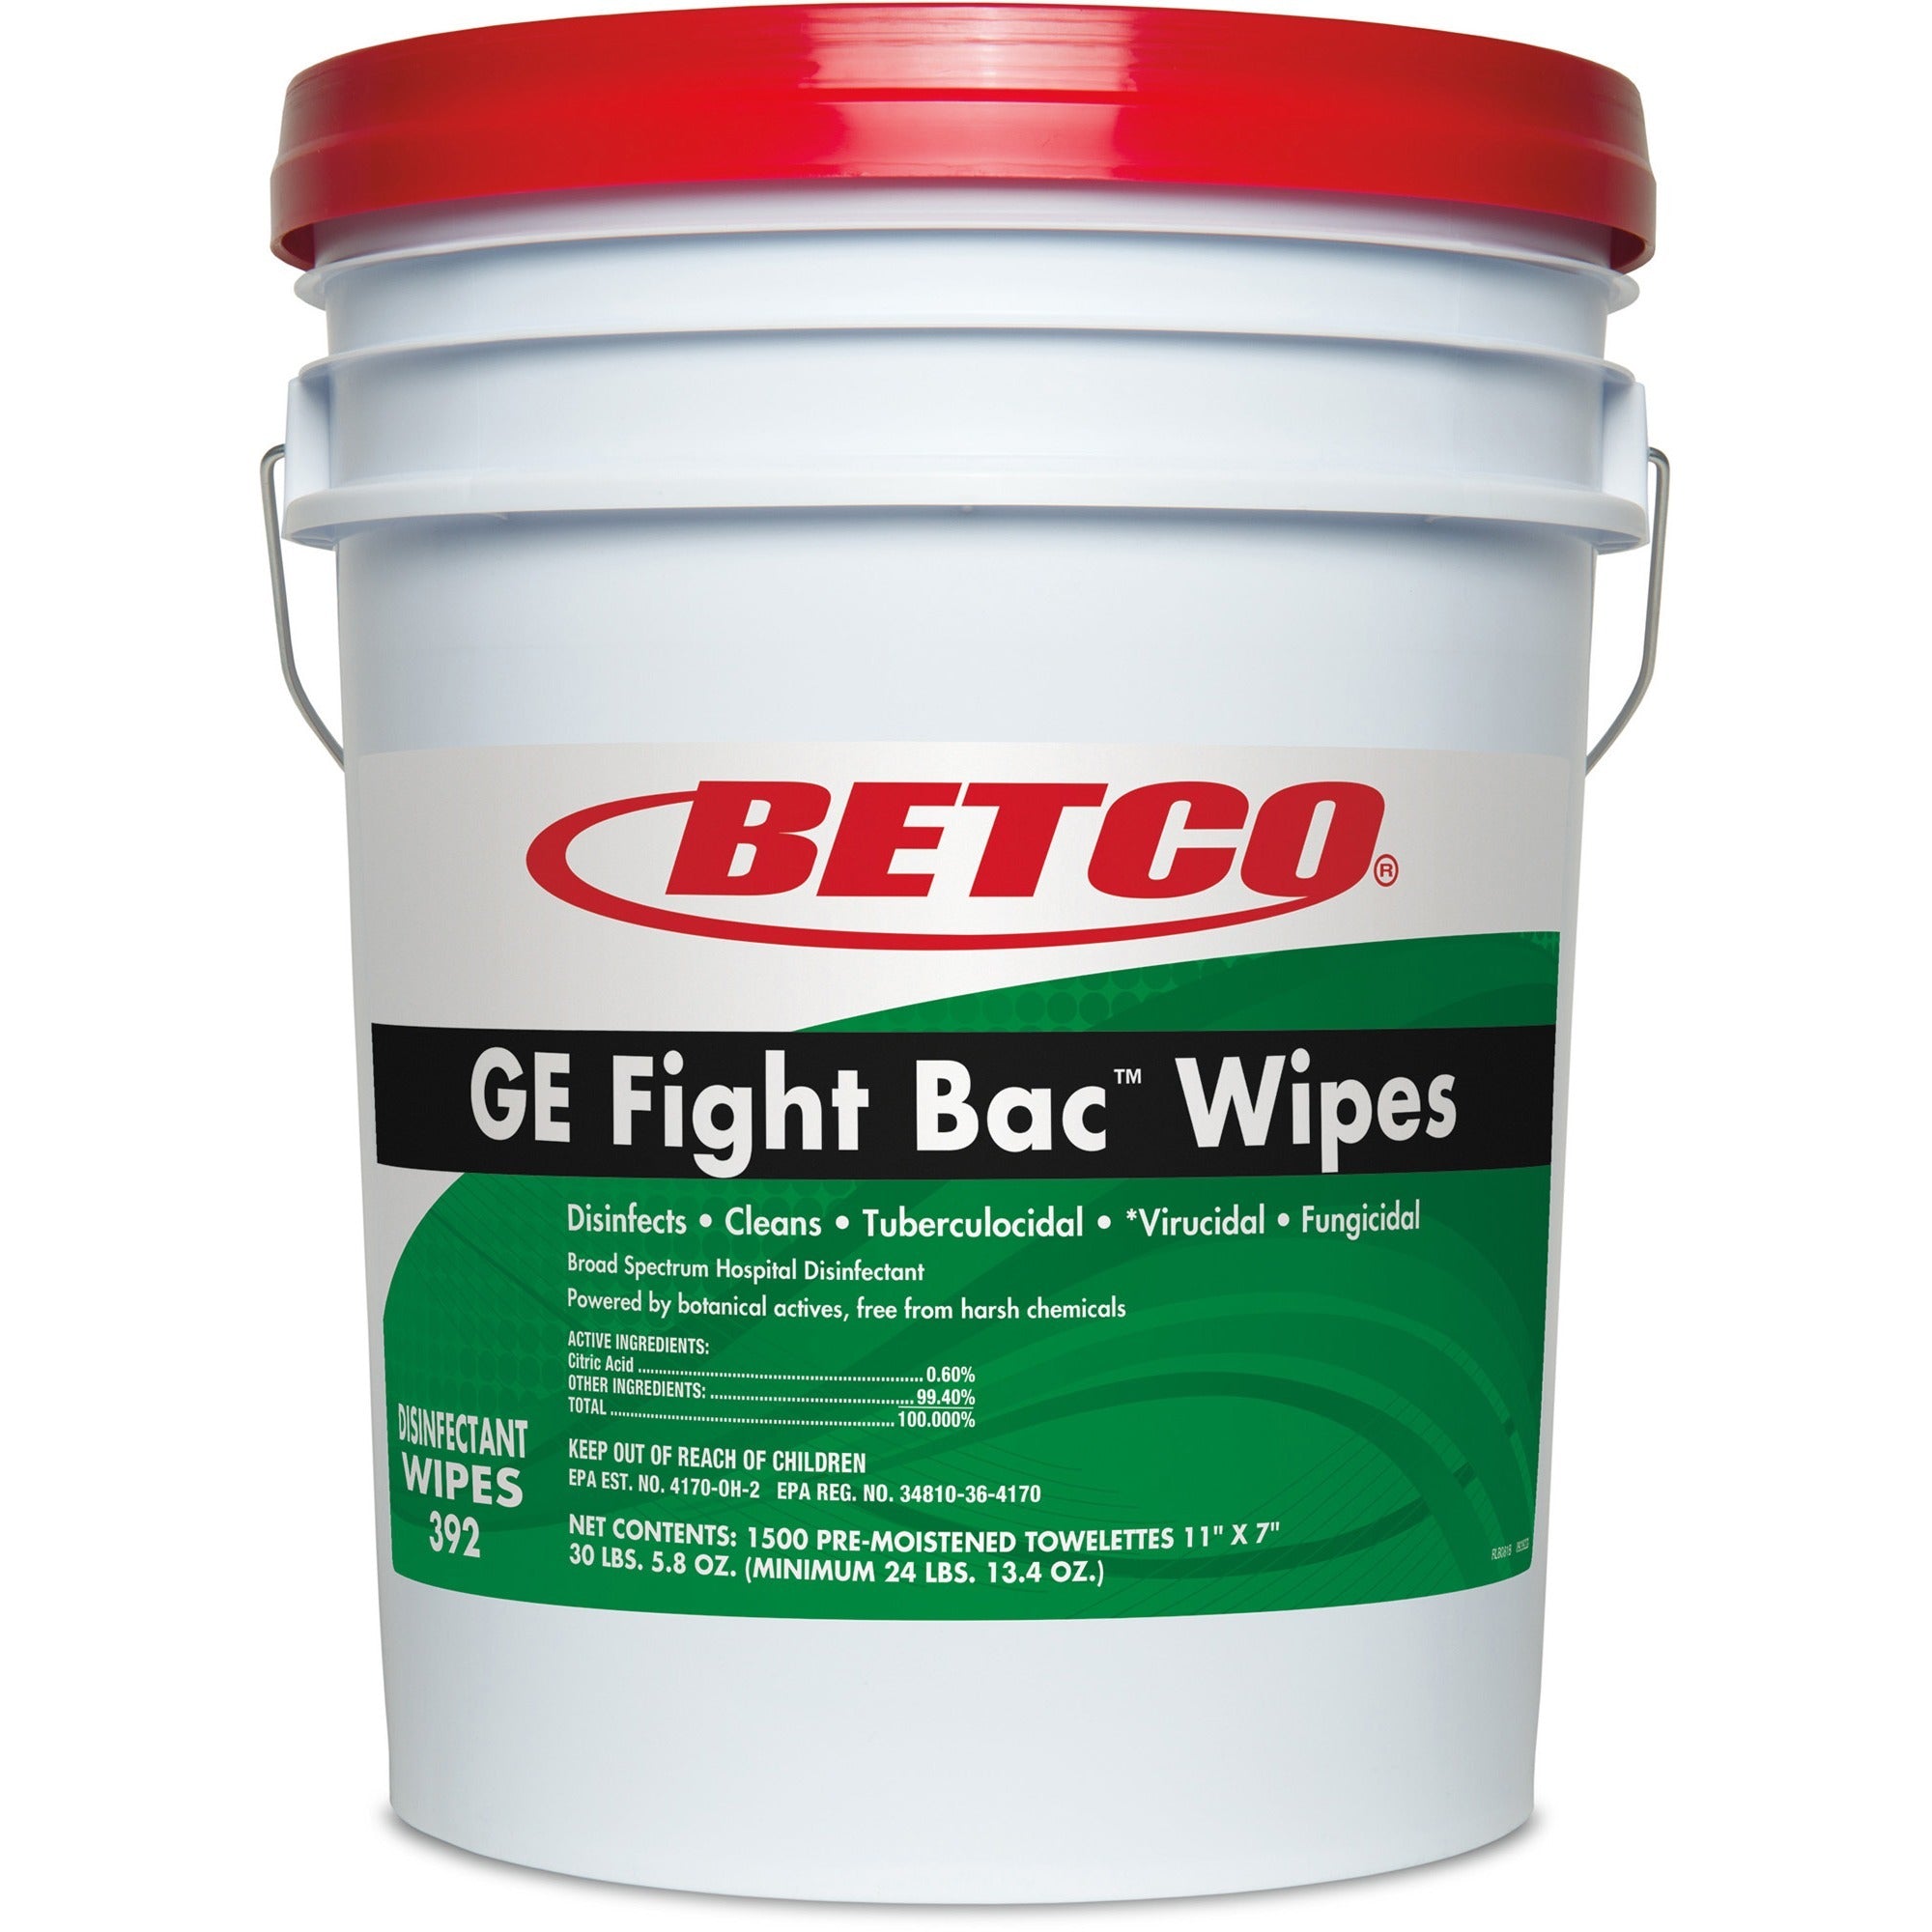 Betco GE Fight Bac Disinfectant Wipes - 7" Length x 11" Width - 1500 / Bucket - 1 Each - Non-irritating, Disinfectant - White - 1